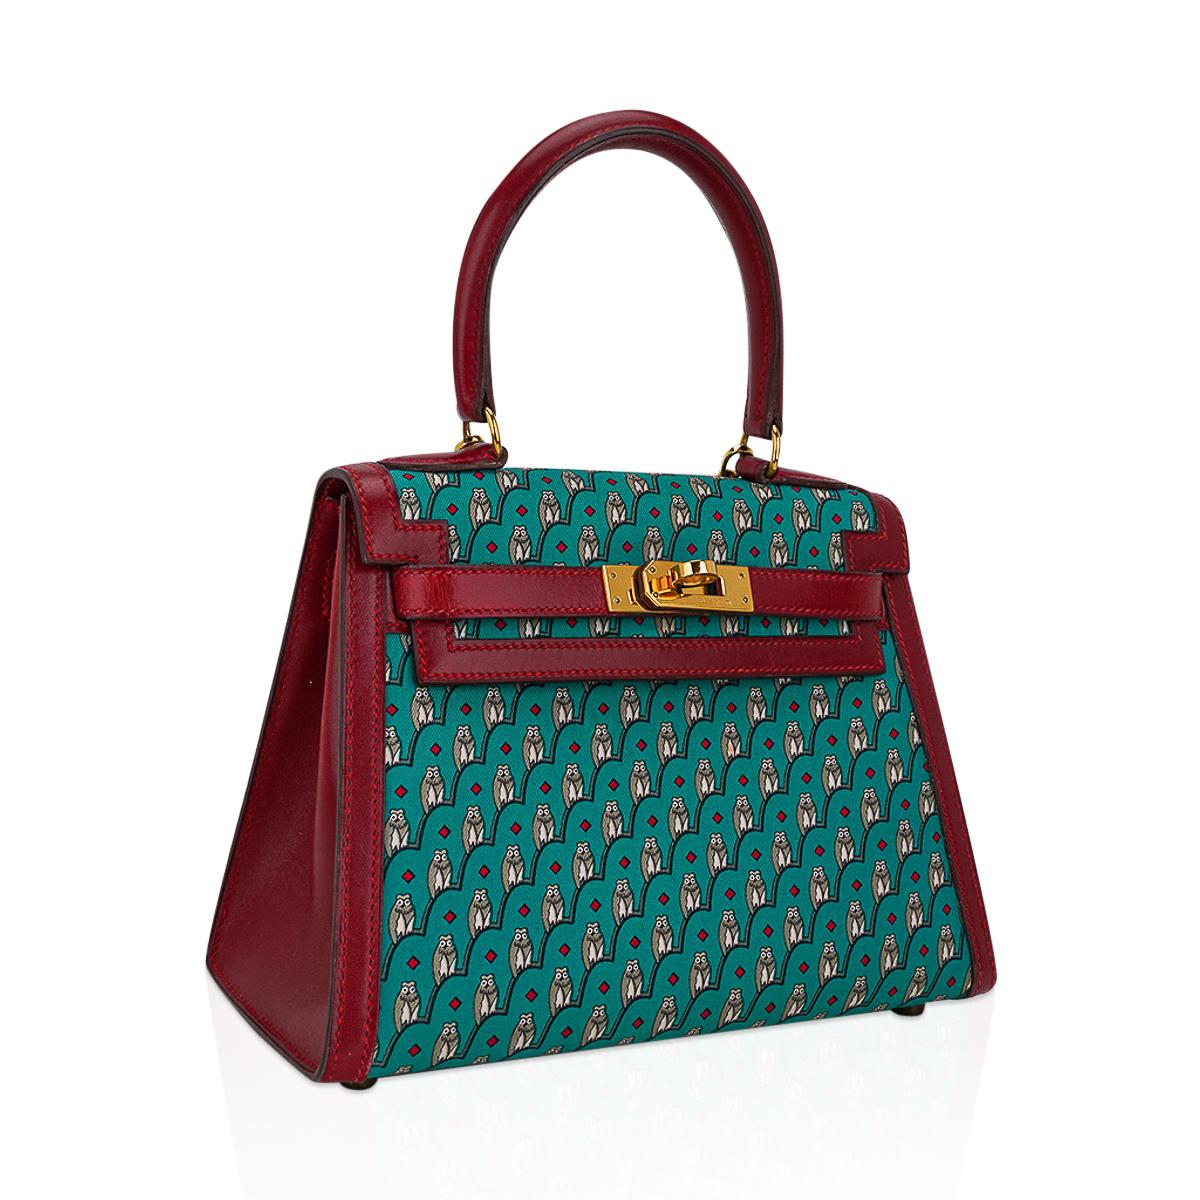 Mightychic offers an Hermes Vintage Hermes Kelly 20 Sellier featured in rare Owl print Silk and Box Calf leather.
Created in 1985 only a small number of these divine bags were produced.
Beautiful muted Green set with charming owls and Rouge diamond